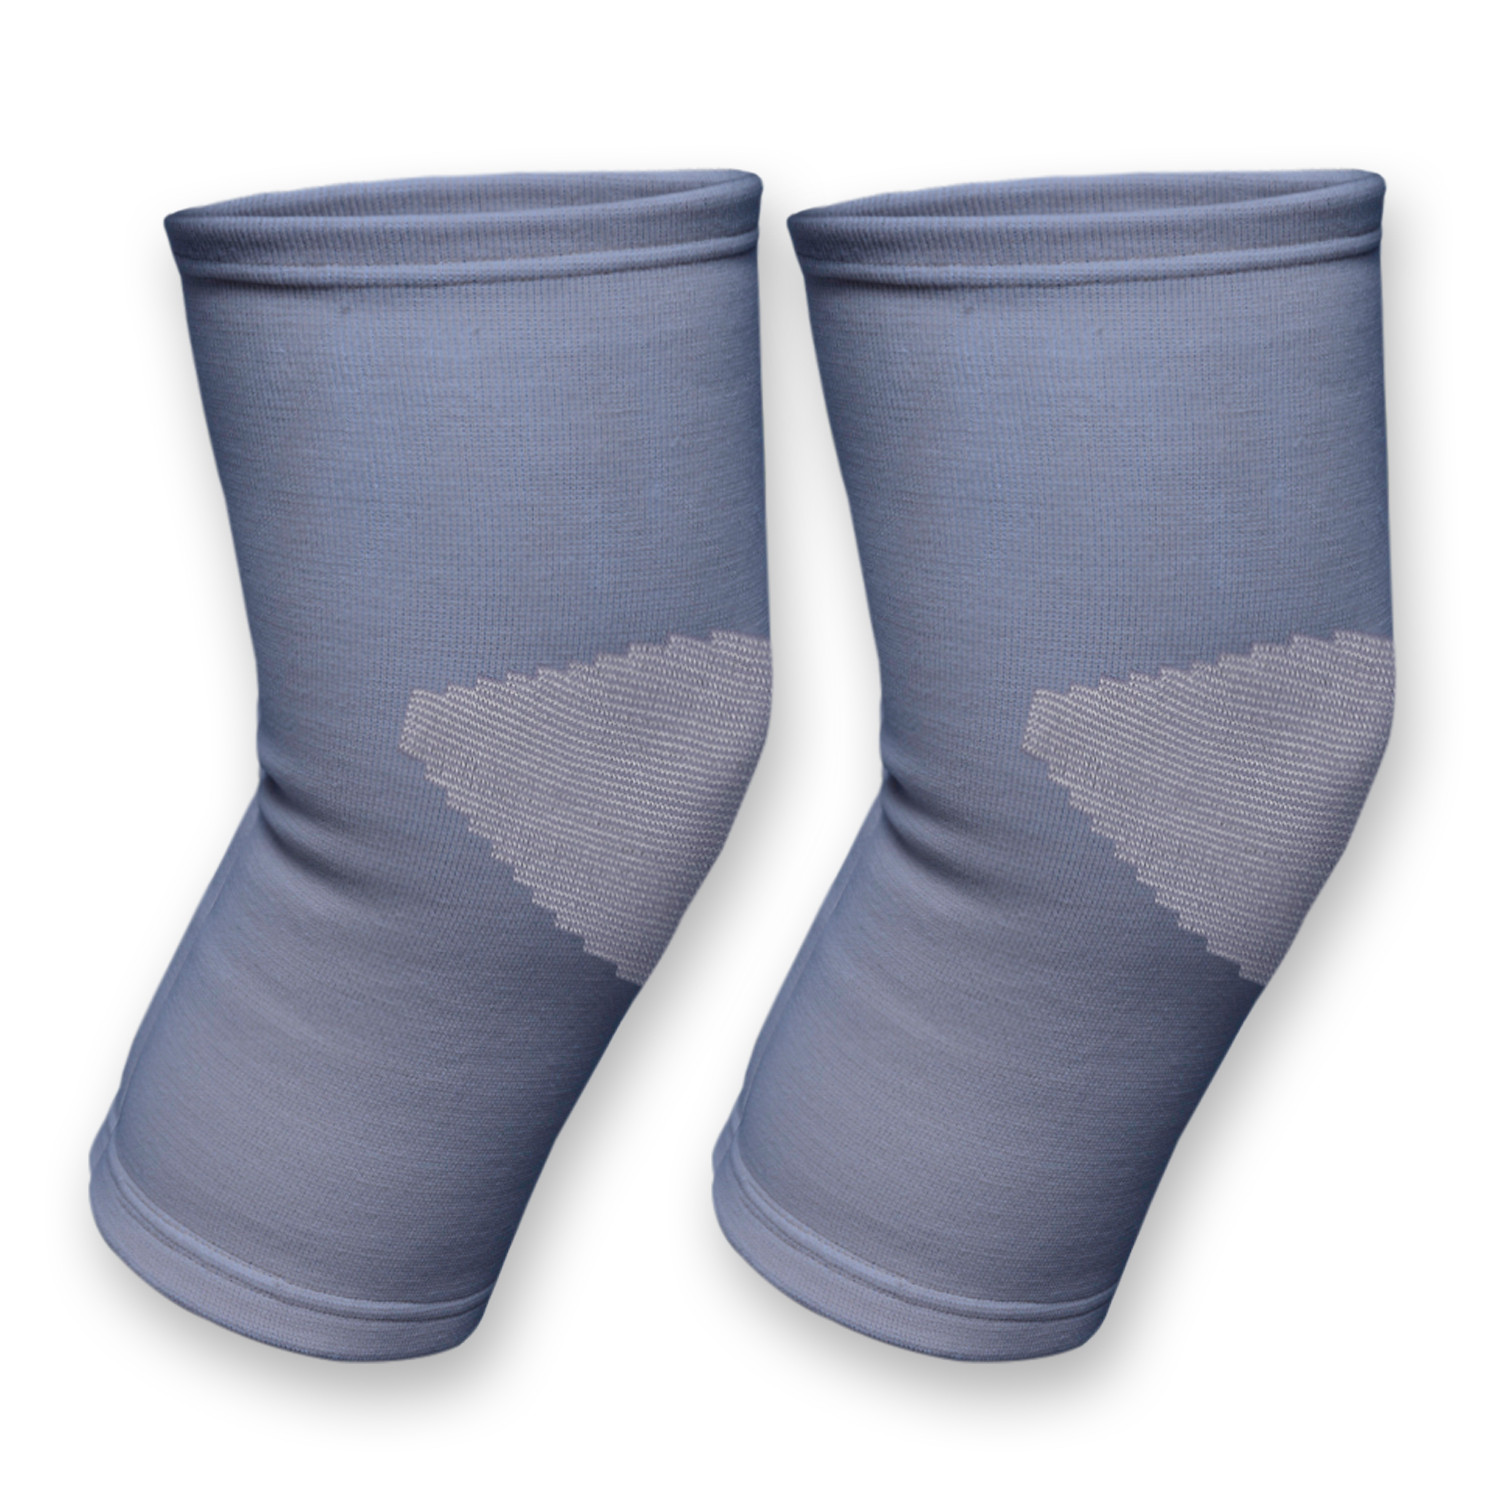 Kuber Industries 3D Knee Cap | Cotton Knee Sleeves |Sleeves For Joint Pain | Sleeves For Arthritis Relief | Unisex Knee Wraps | Knee Bands | Size-S | 1 Pair | Gray & White